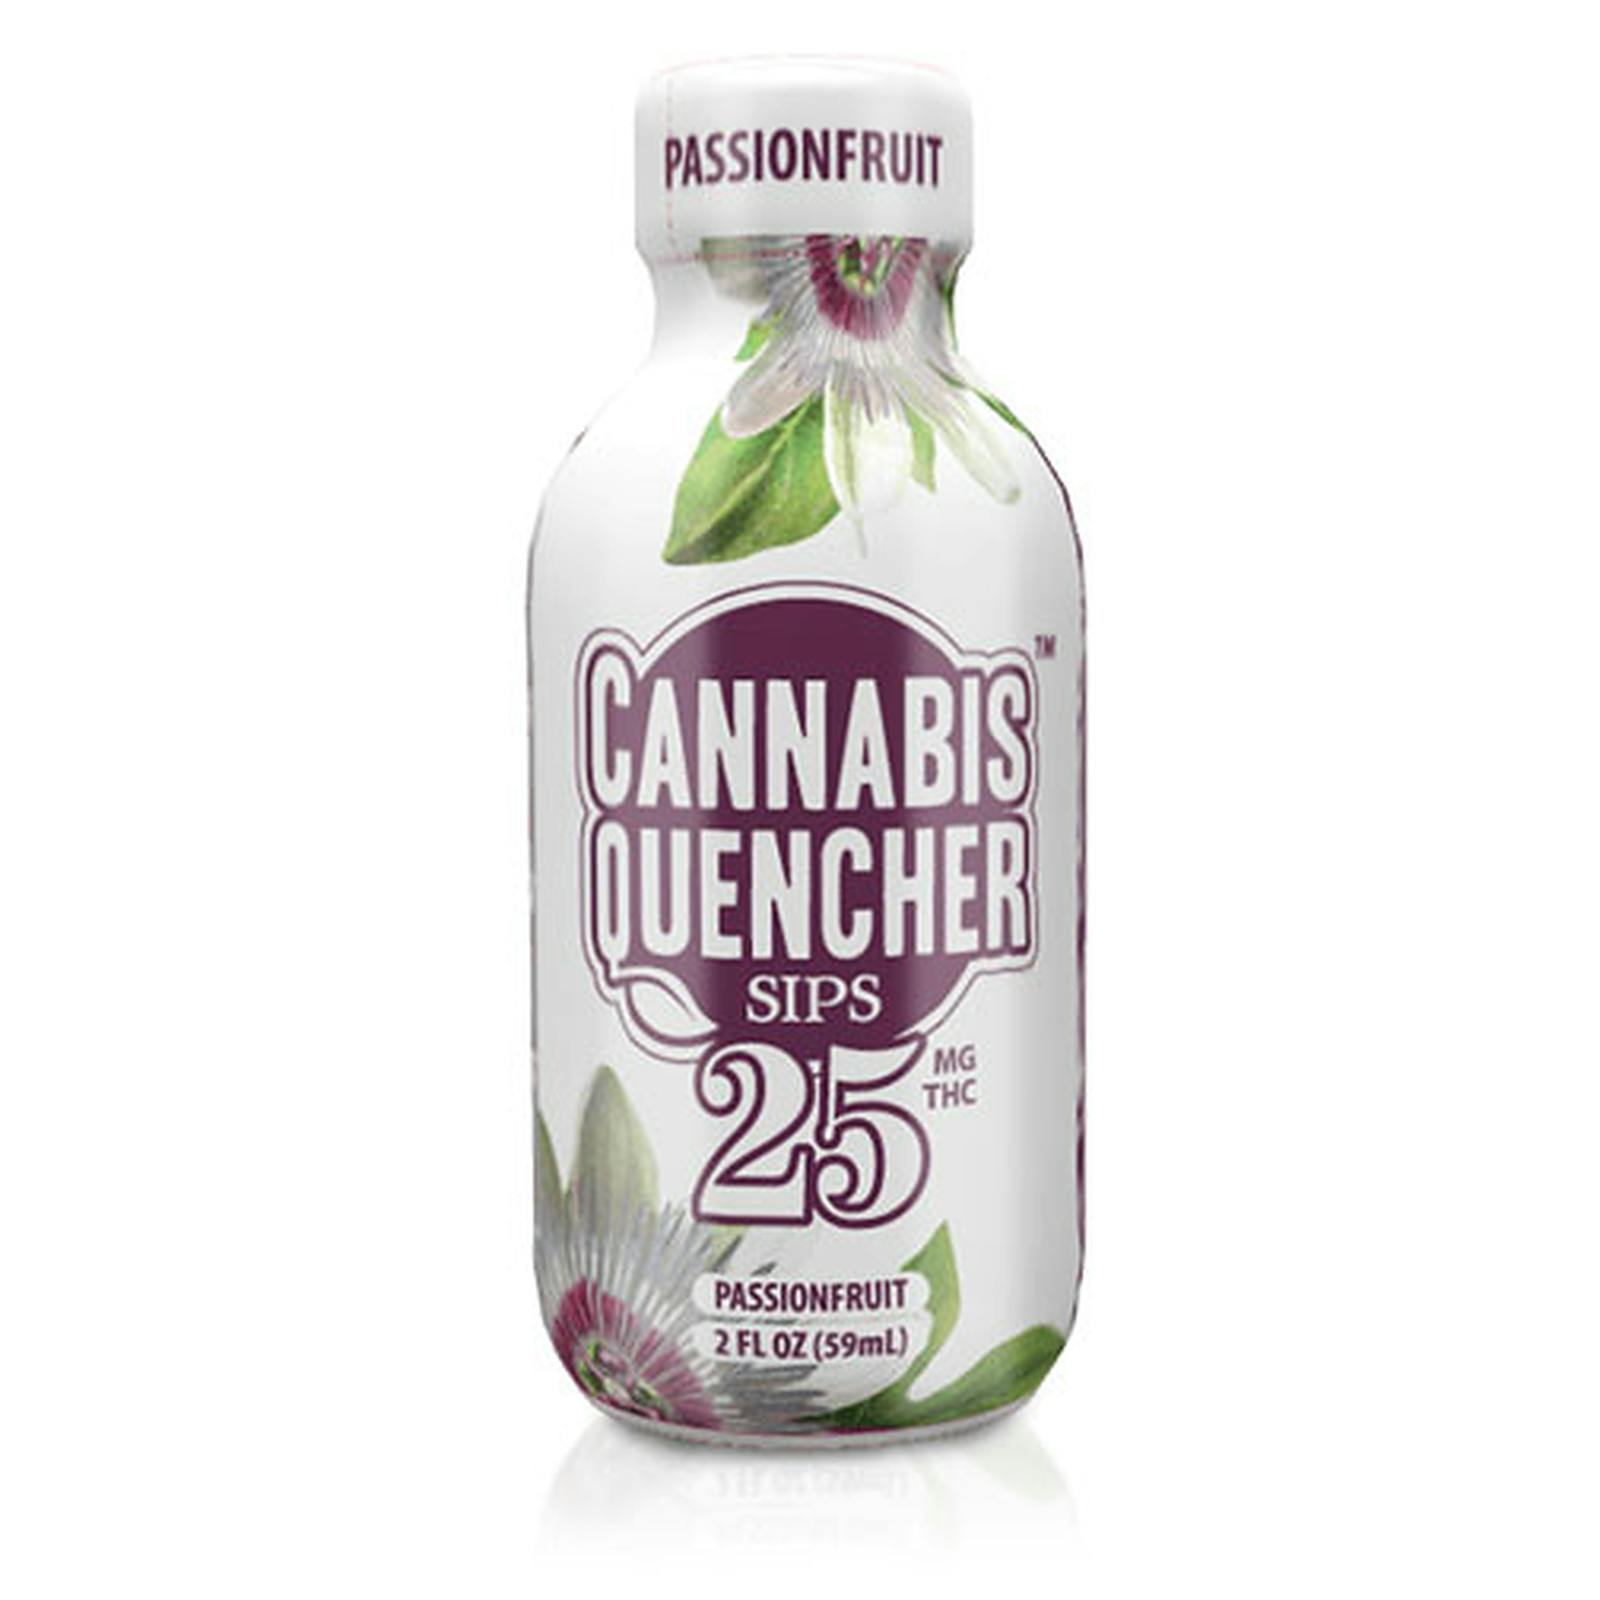 Cannabis Quencher Passionfruit Sips 25mg Leafly